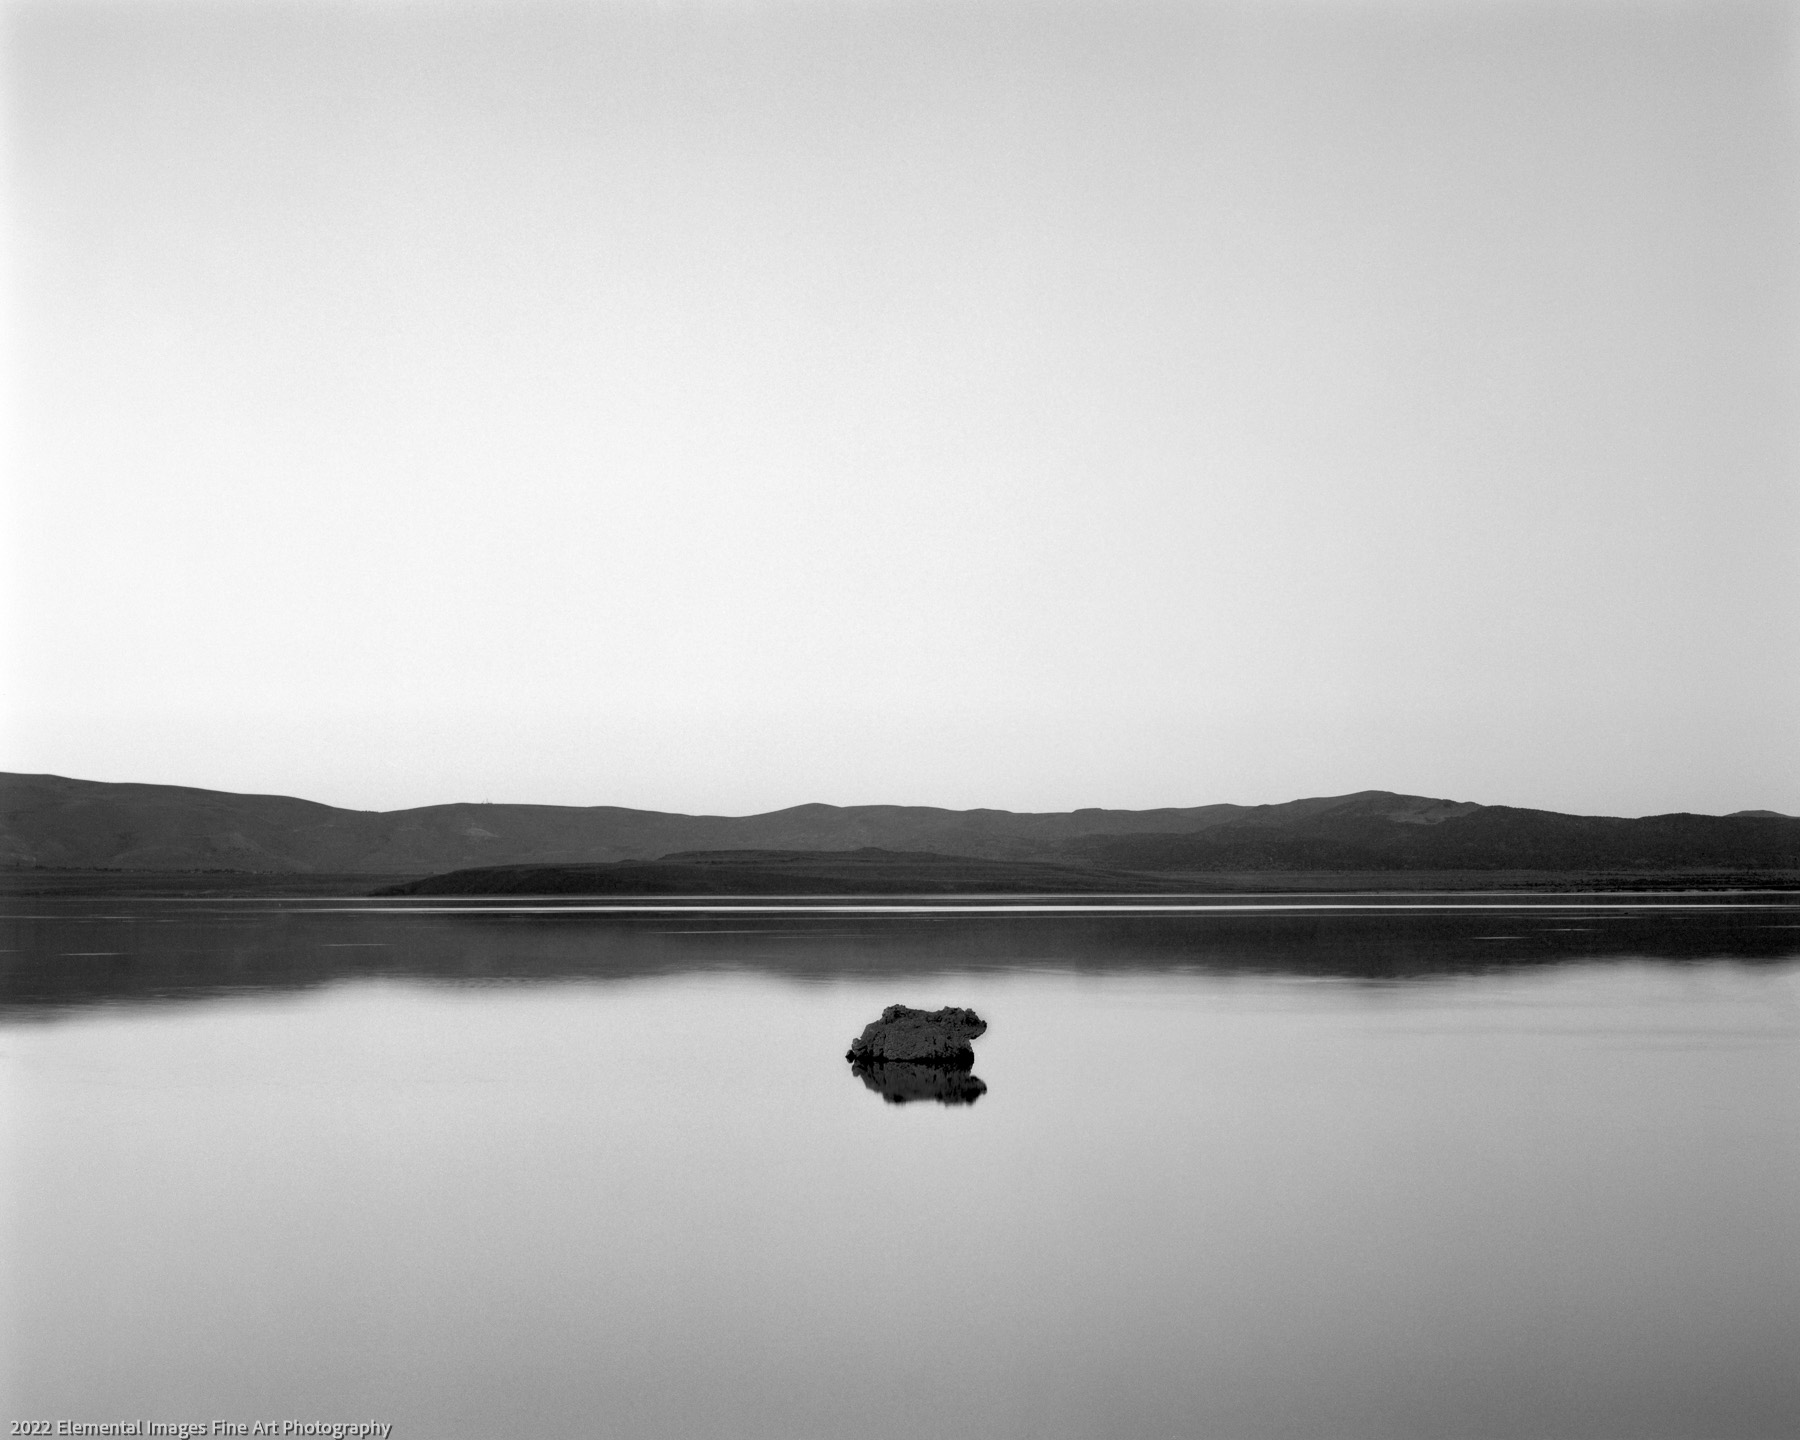 Quiet Serenity | Mono Lake | CA | USA - © 2022 Elemental Images Fine Art Photography - All Rights Reserved Worldwide